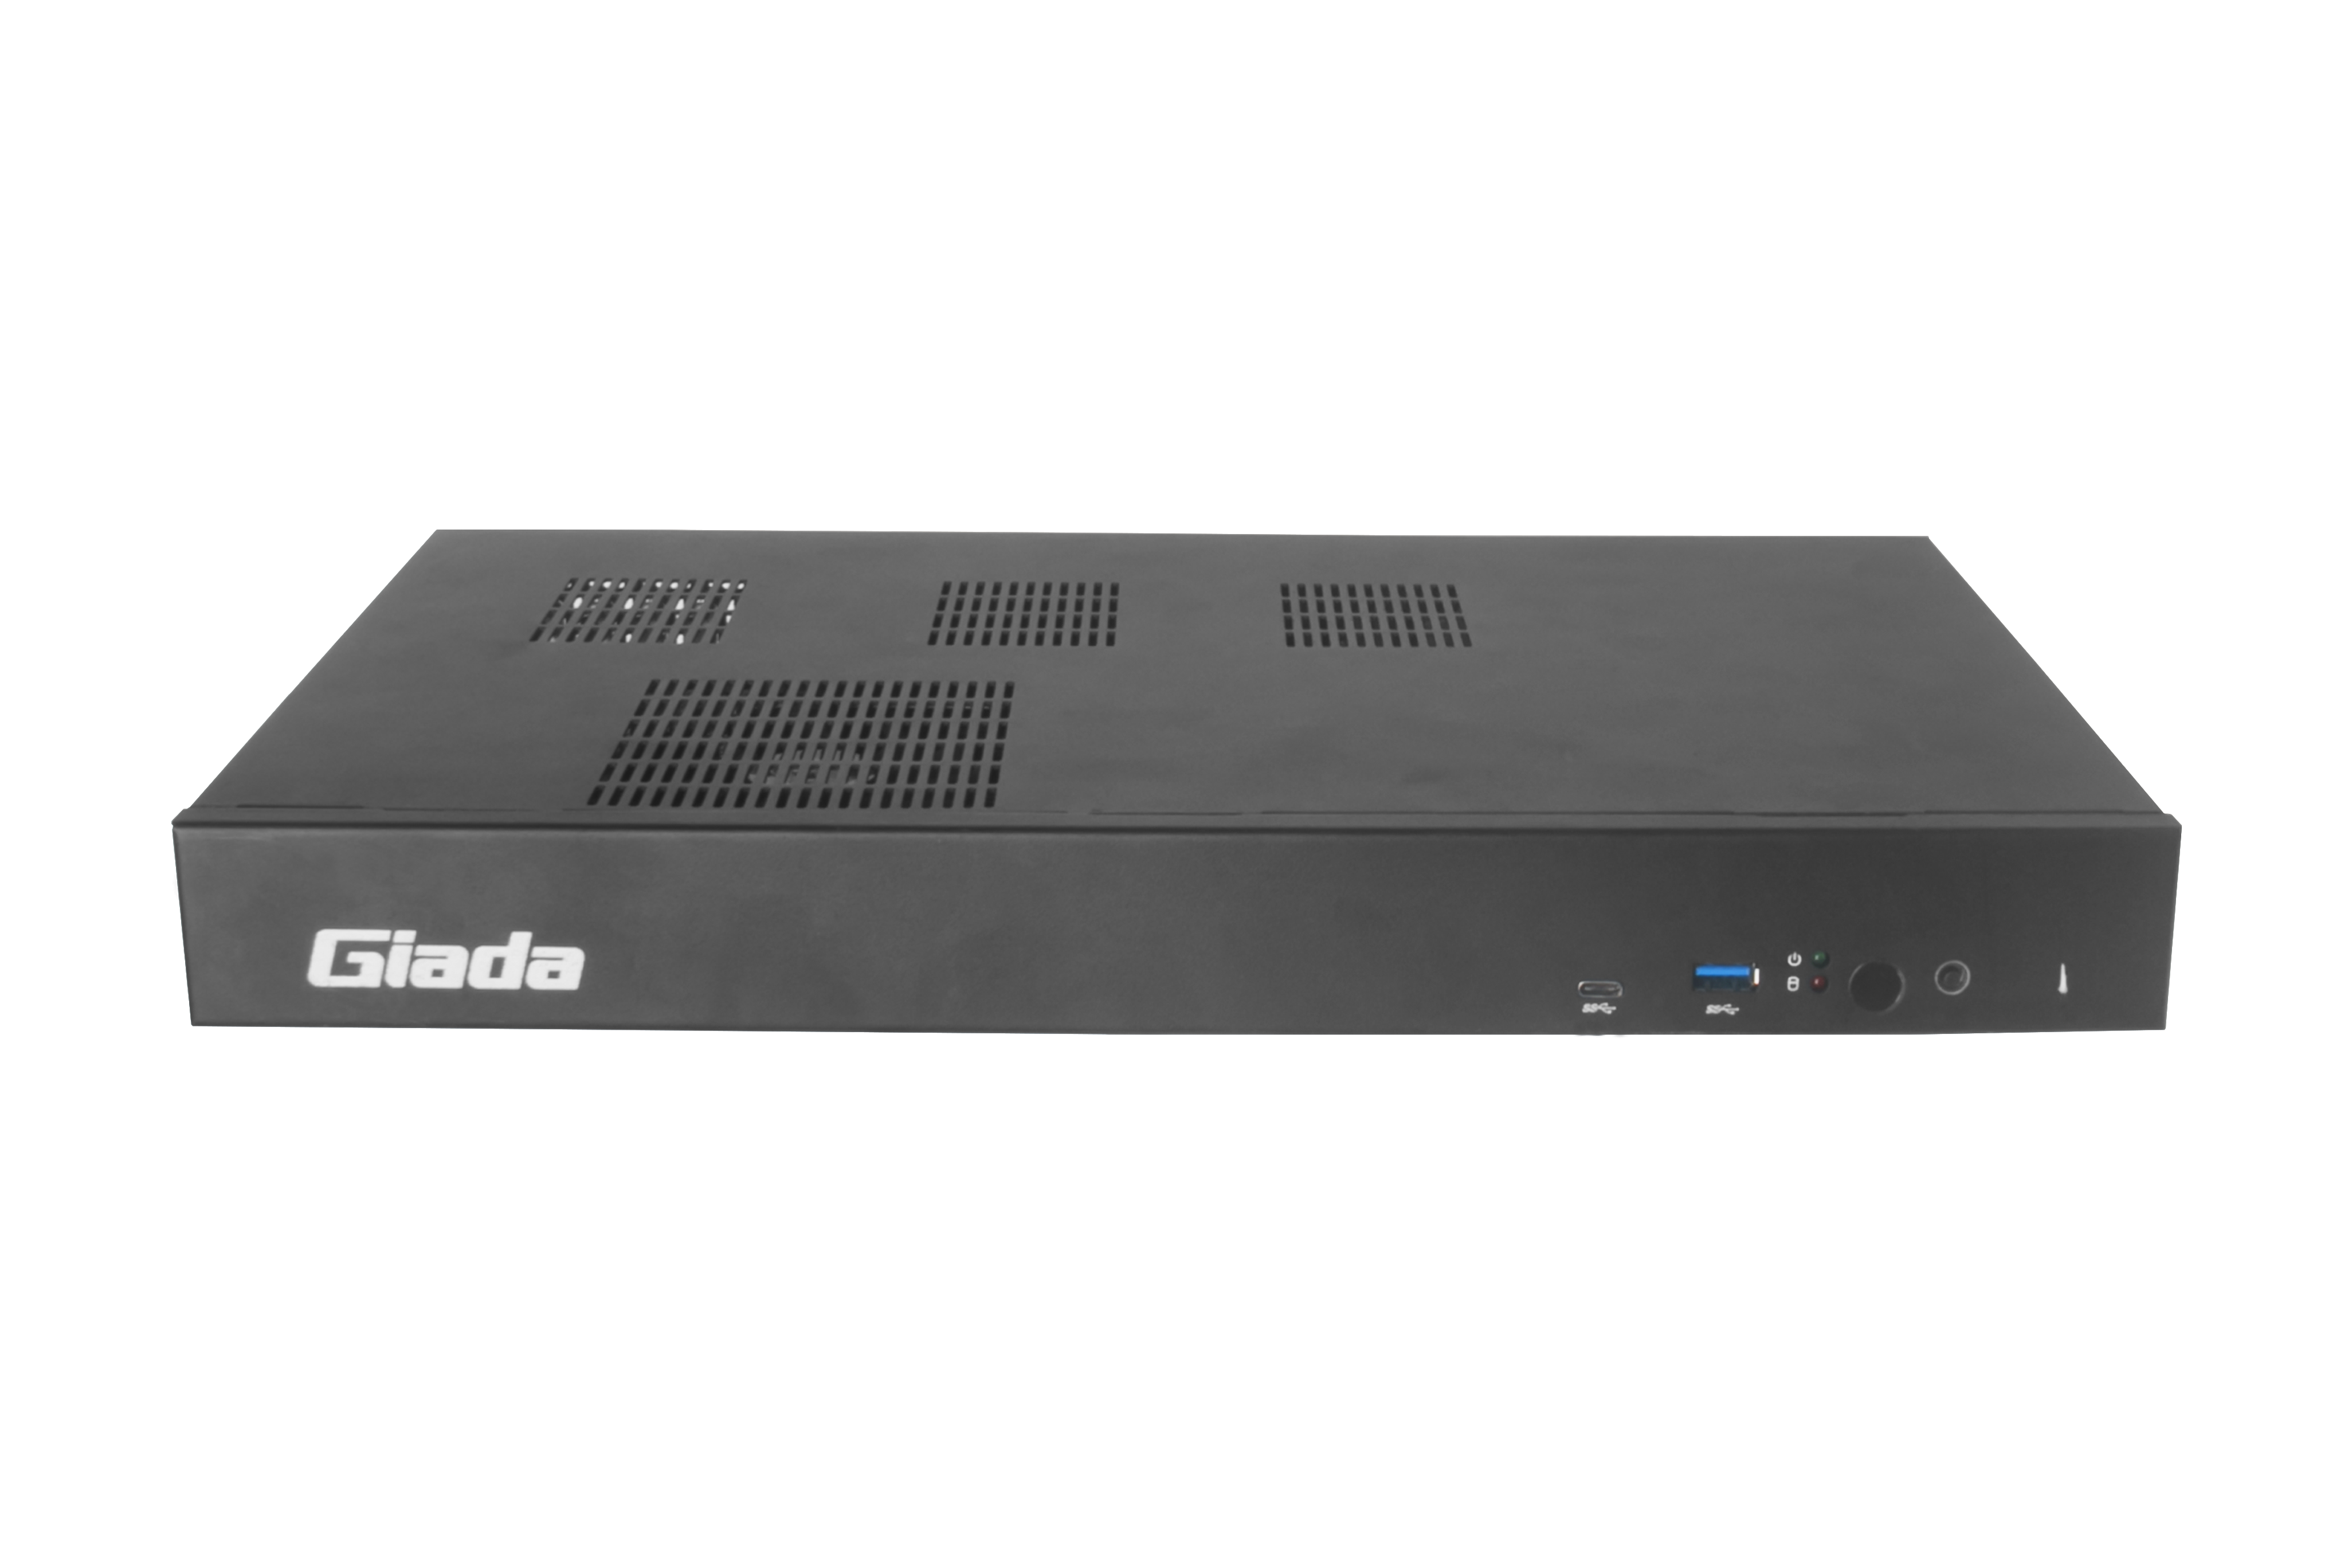 Giada G1568 15-Port Video Wall Signage Player Supporting EDID Emulation Function